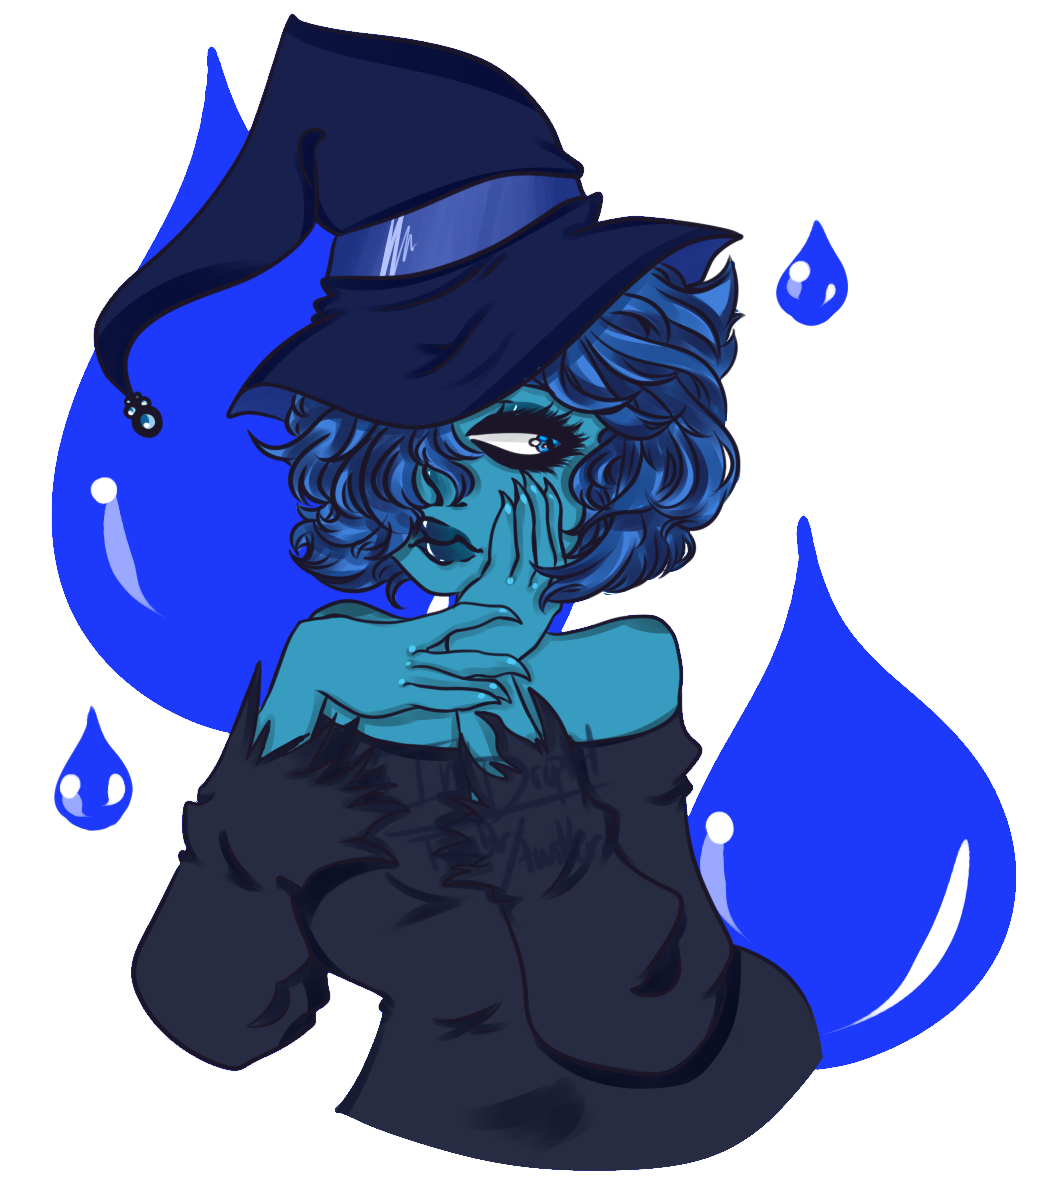 Water Witch Available as a sticker on Redbubble!